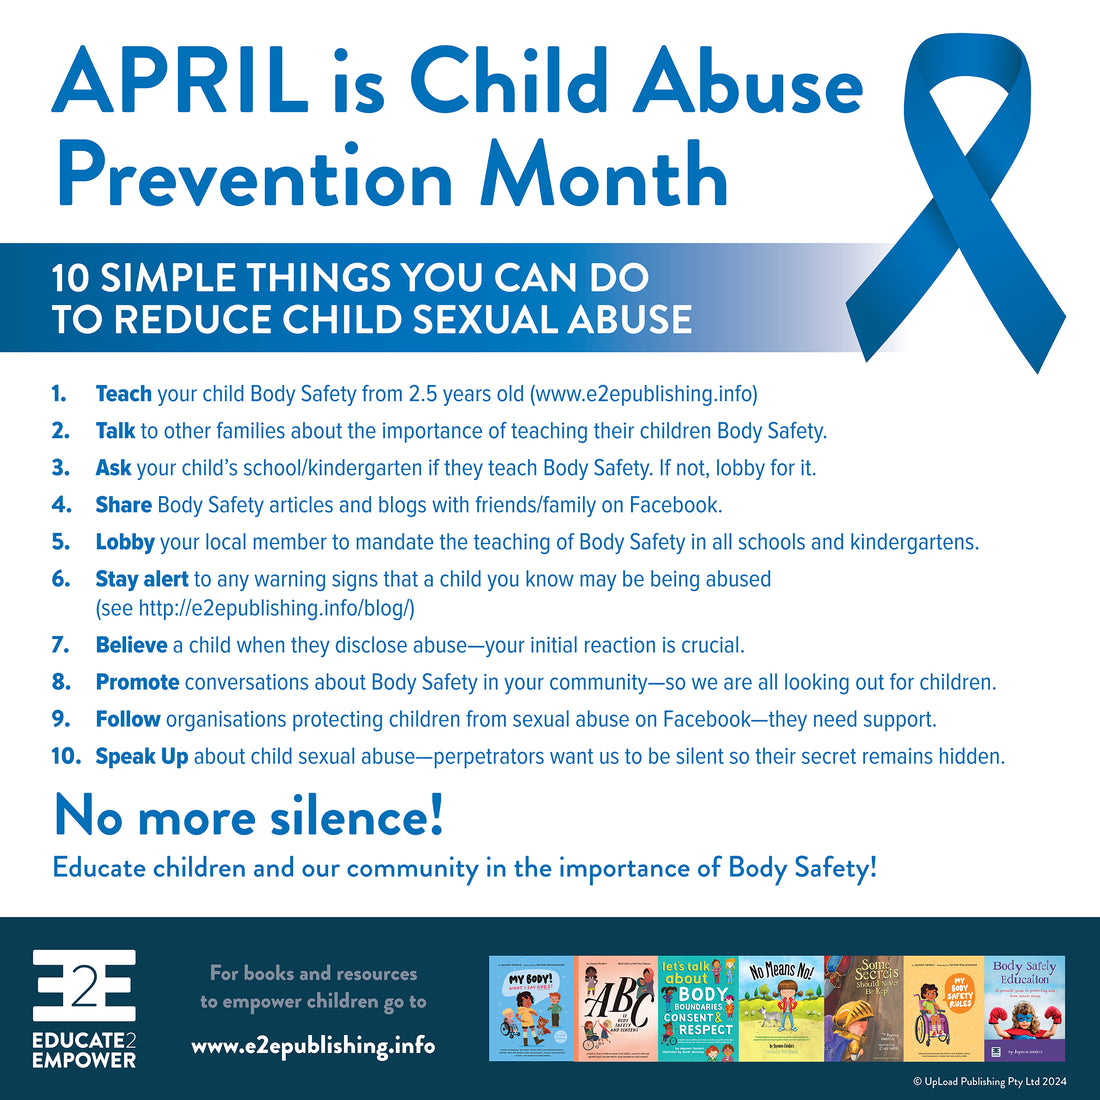 APRIL is Child Abuse Prevention Month